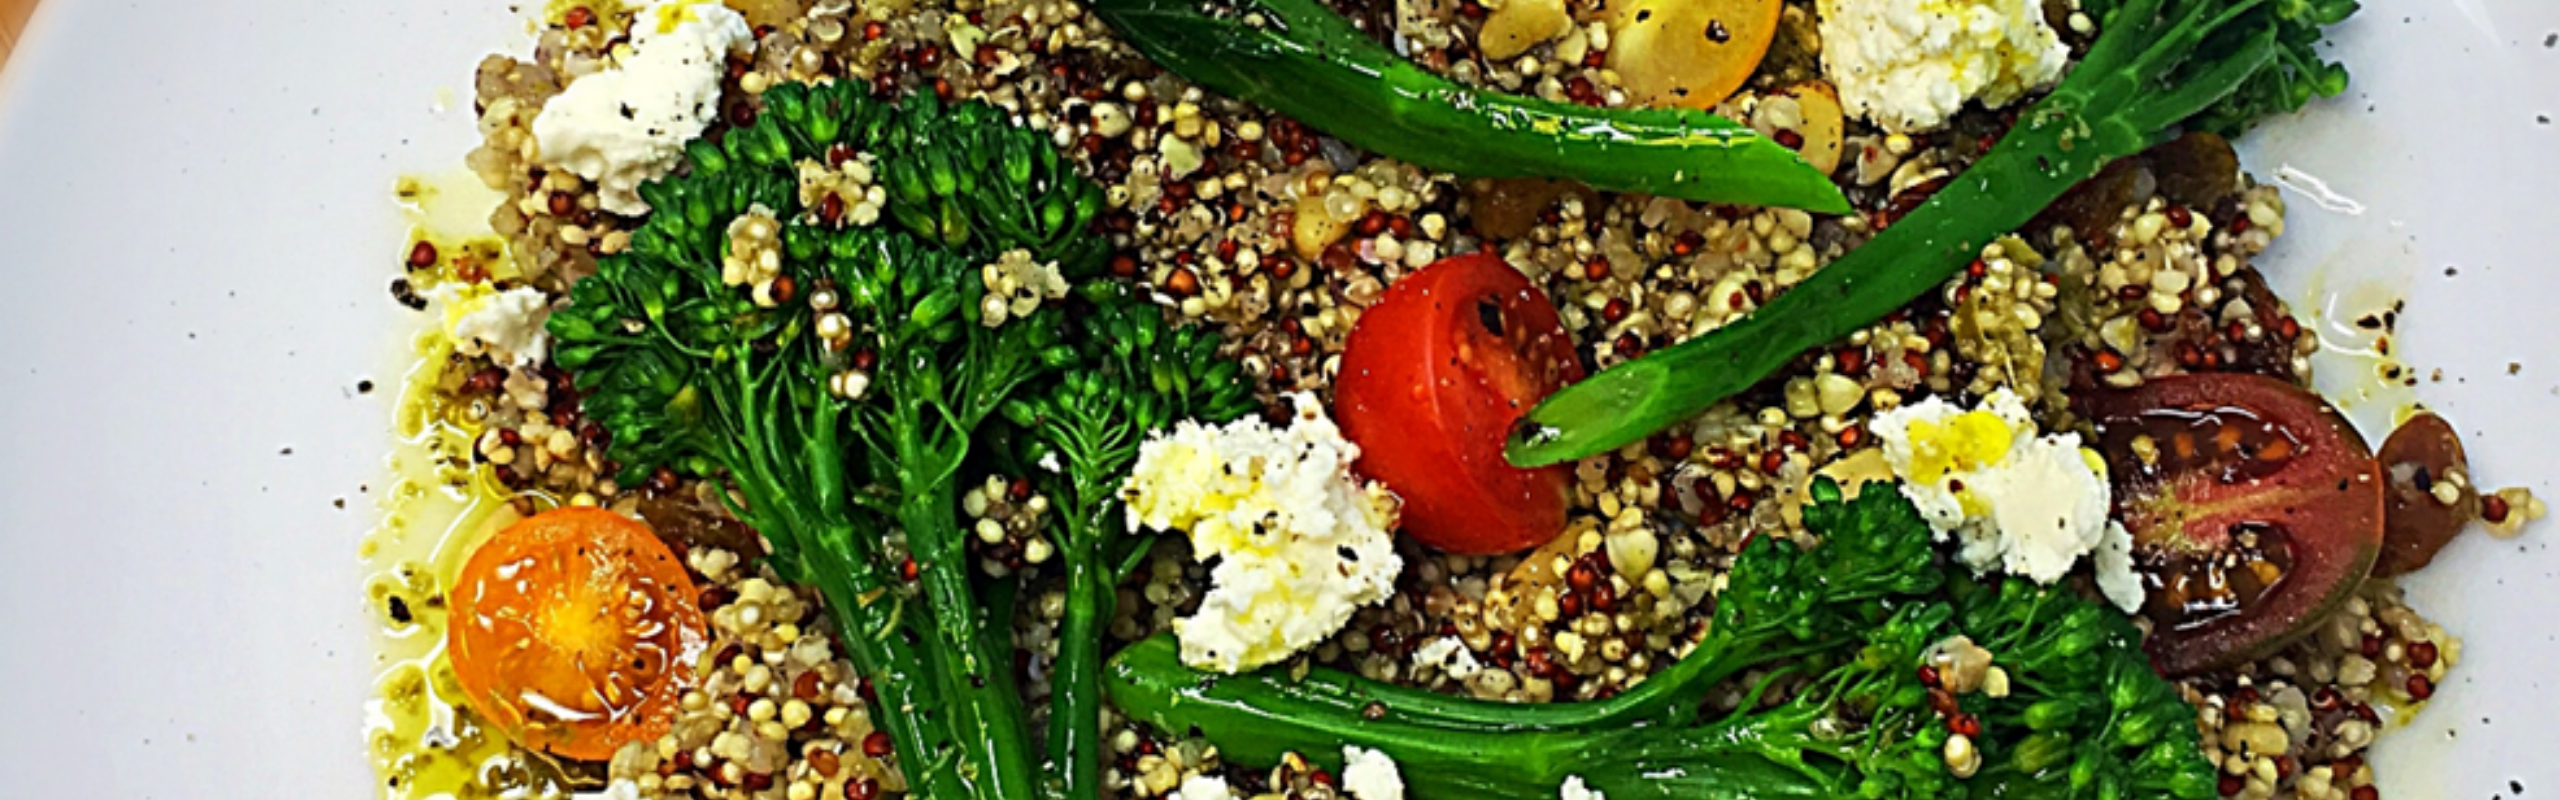 Feature Image: Broccolini, Goat’s Cheese, and Ancient Grain Salad